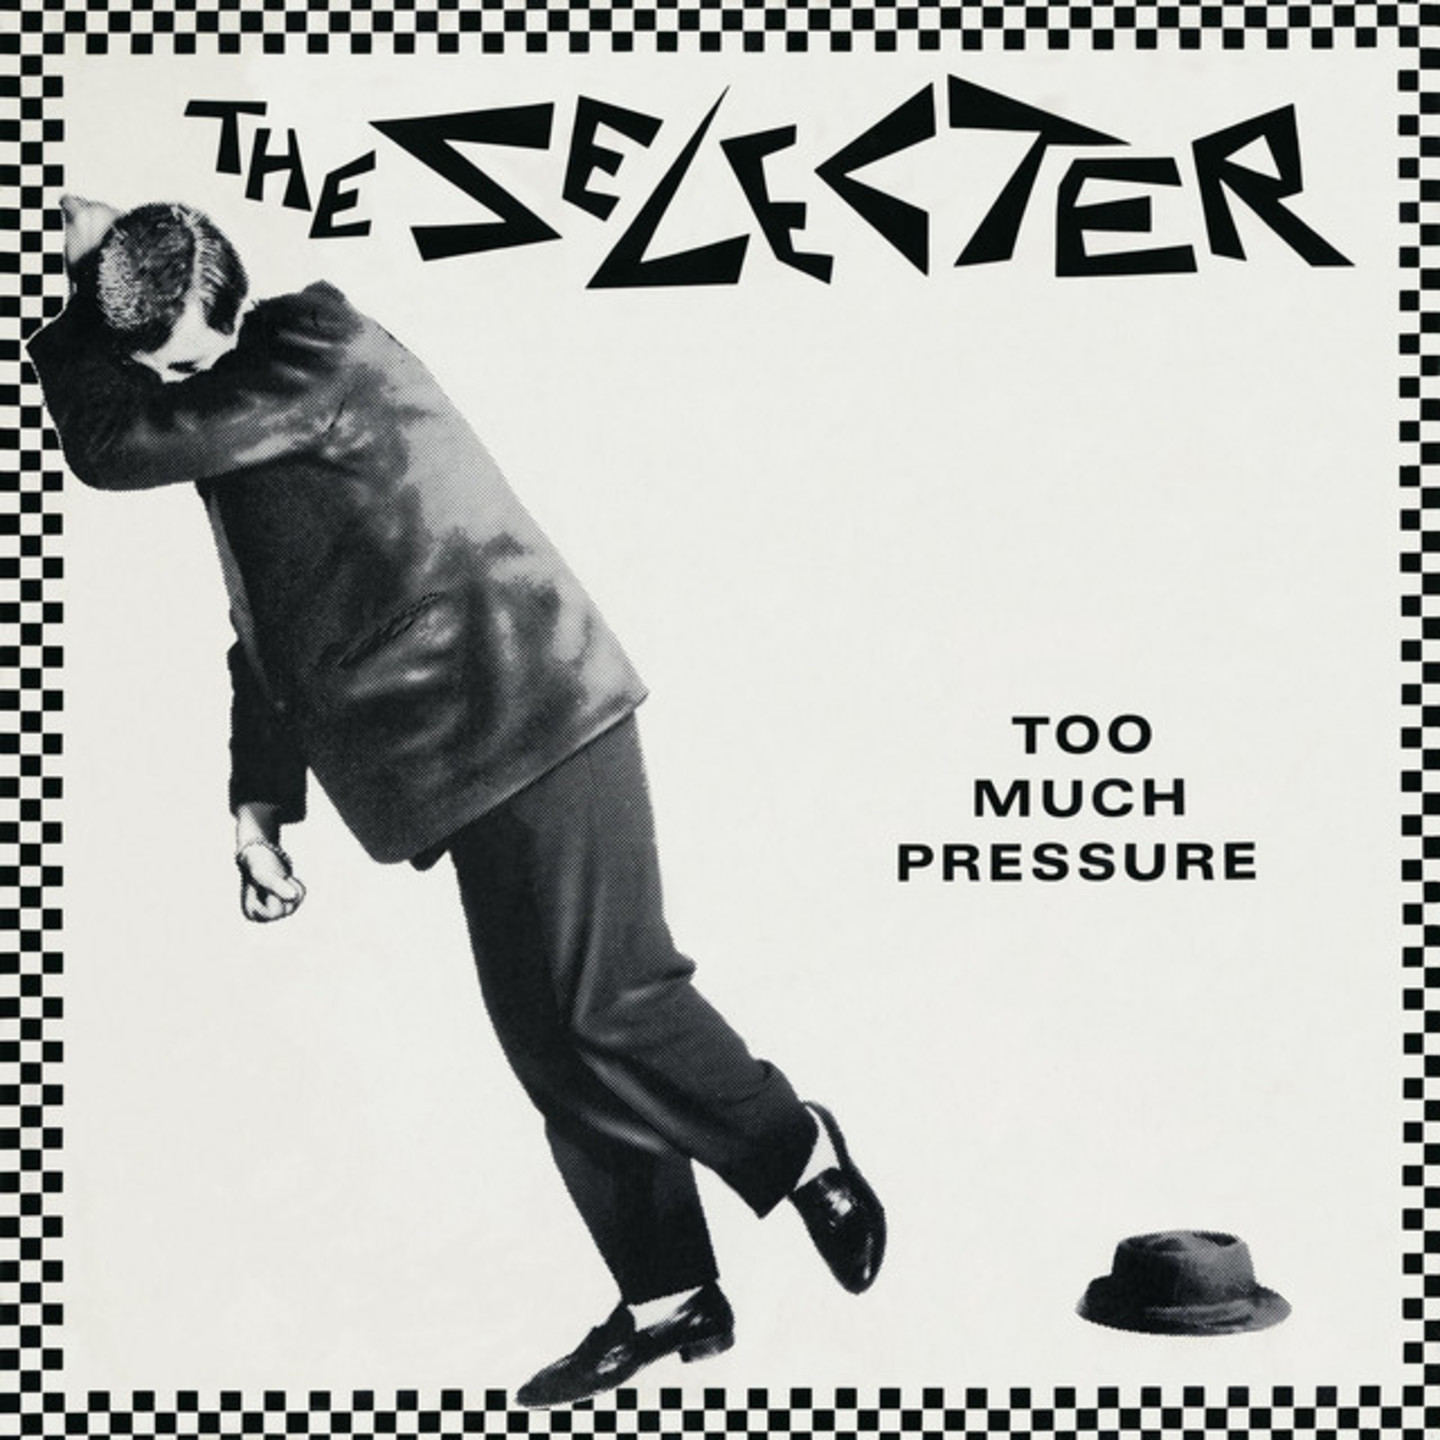 SELECTER, THE - Too Much Pressure LP+7 40th Anniversary Edition